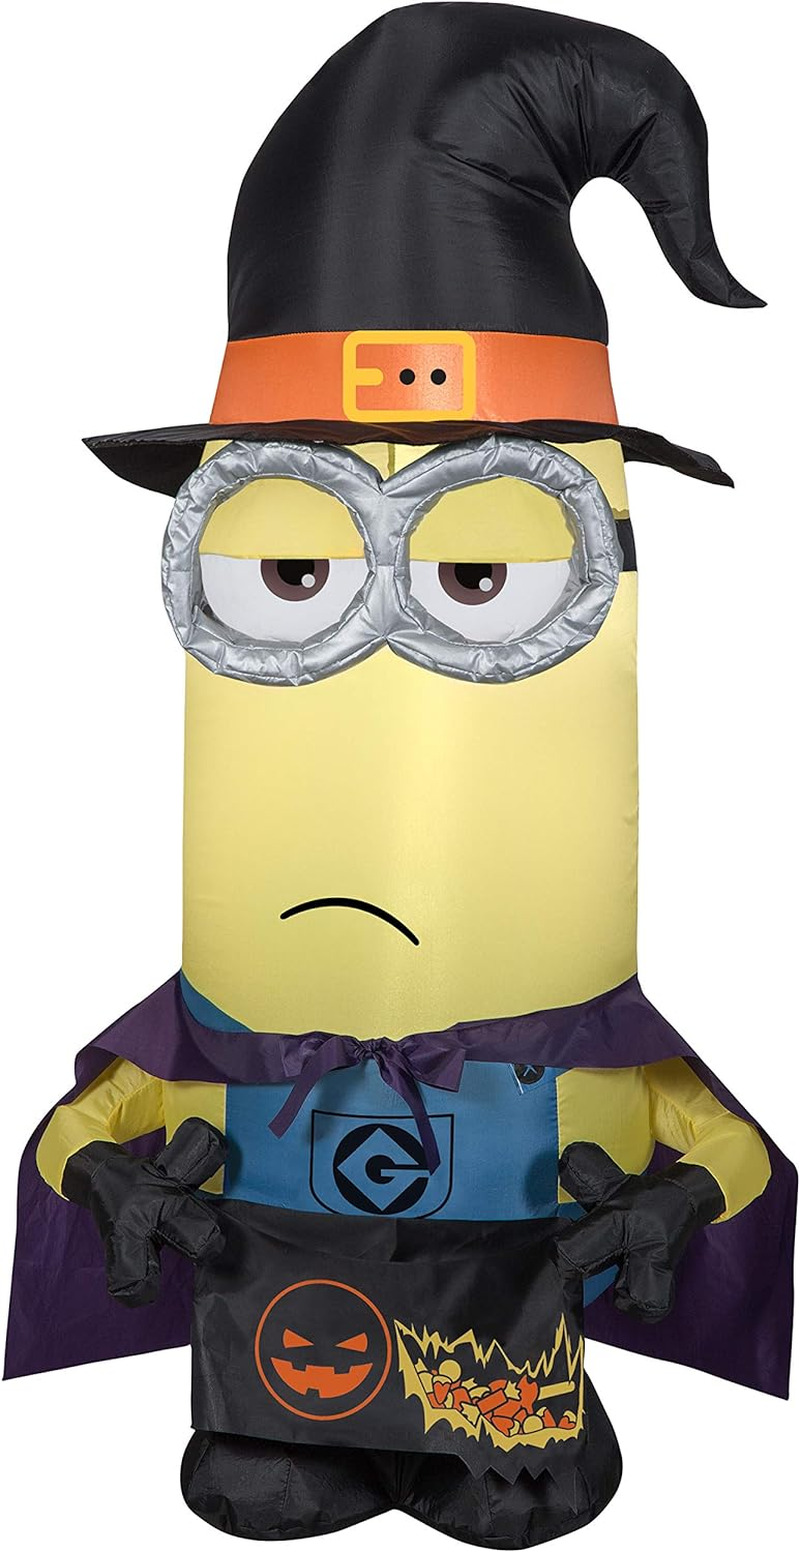 3.5\' Airblown Inflatable Minion Kevin as Witch Universal